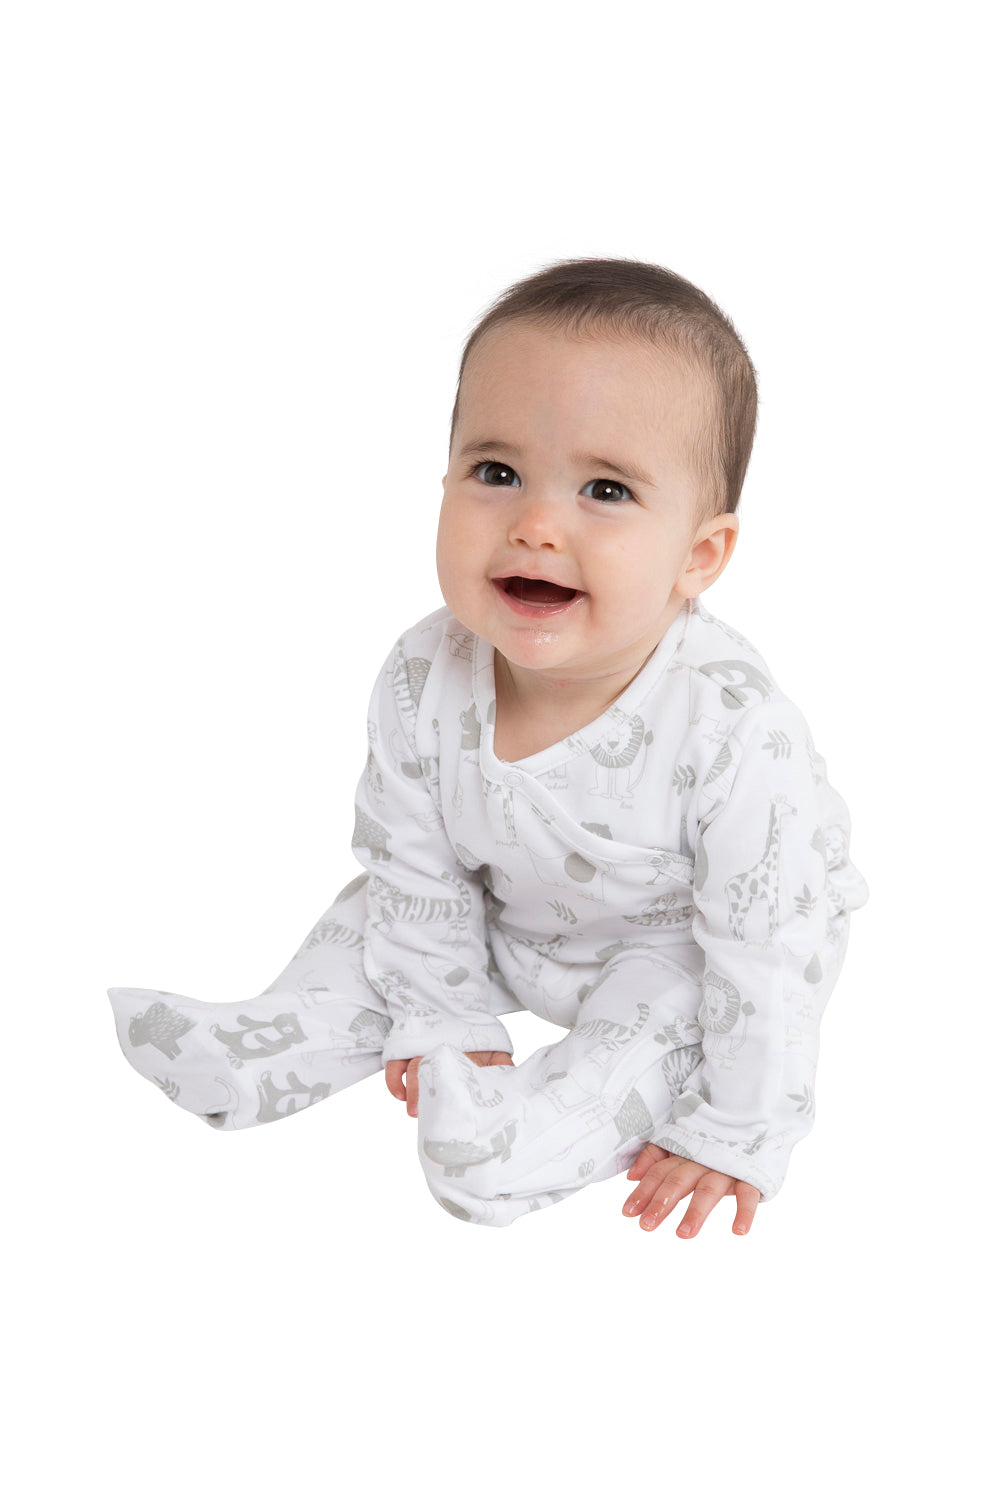 Lucky Jade Kids sells a darling gender neutral white take me home set with jammies, blanket and beanie with a jungle animal print. jungle animal baby outfit gender neutral baby outfit layette gift set #luckyjadekids #luckyjadeinc #pimacotton #takemehomeset #footie #hat #blanket #baby jammies #animalprintblanket #blankie #babybeanie #beanie #whitebeanie #whiteonesie #babyoutfit #babyswaddle #pimacottonjammies #swaddleblanket #babyclothesforsell #babyoutfit